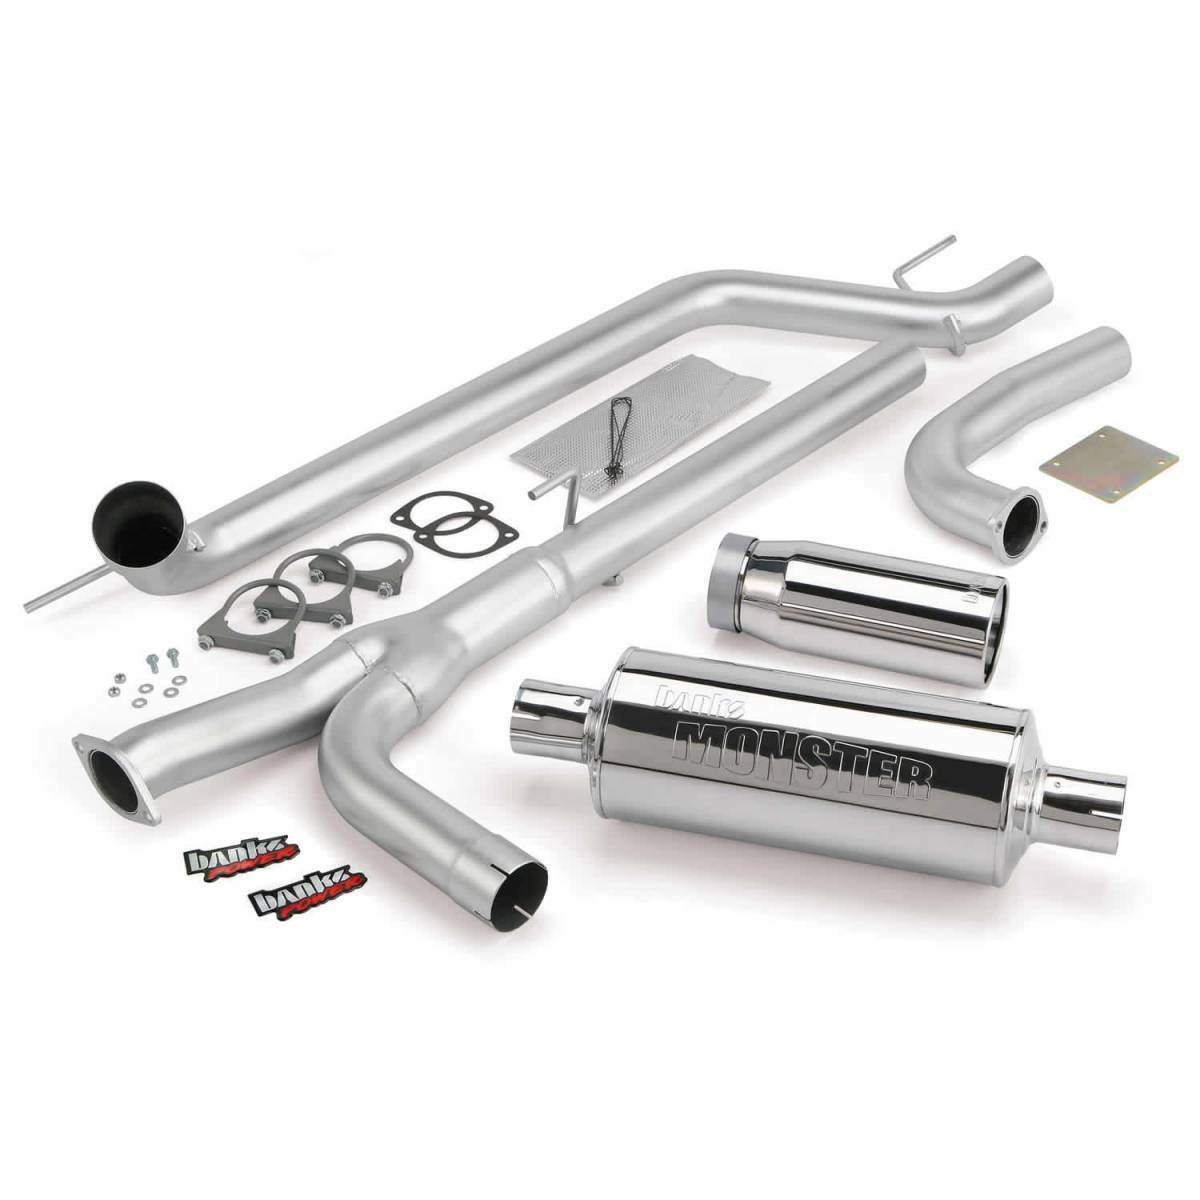 BANKS CATBACK EXHAUST SYSTEM STAINLESS STEEL FOR 2004-2015 NISSAN TITAN 5.6L V8